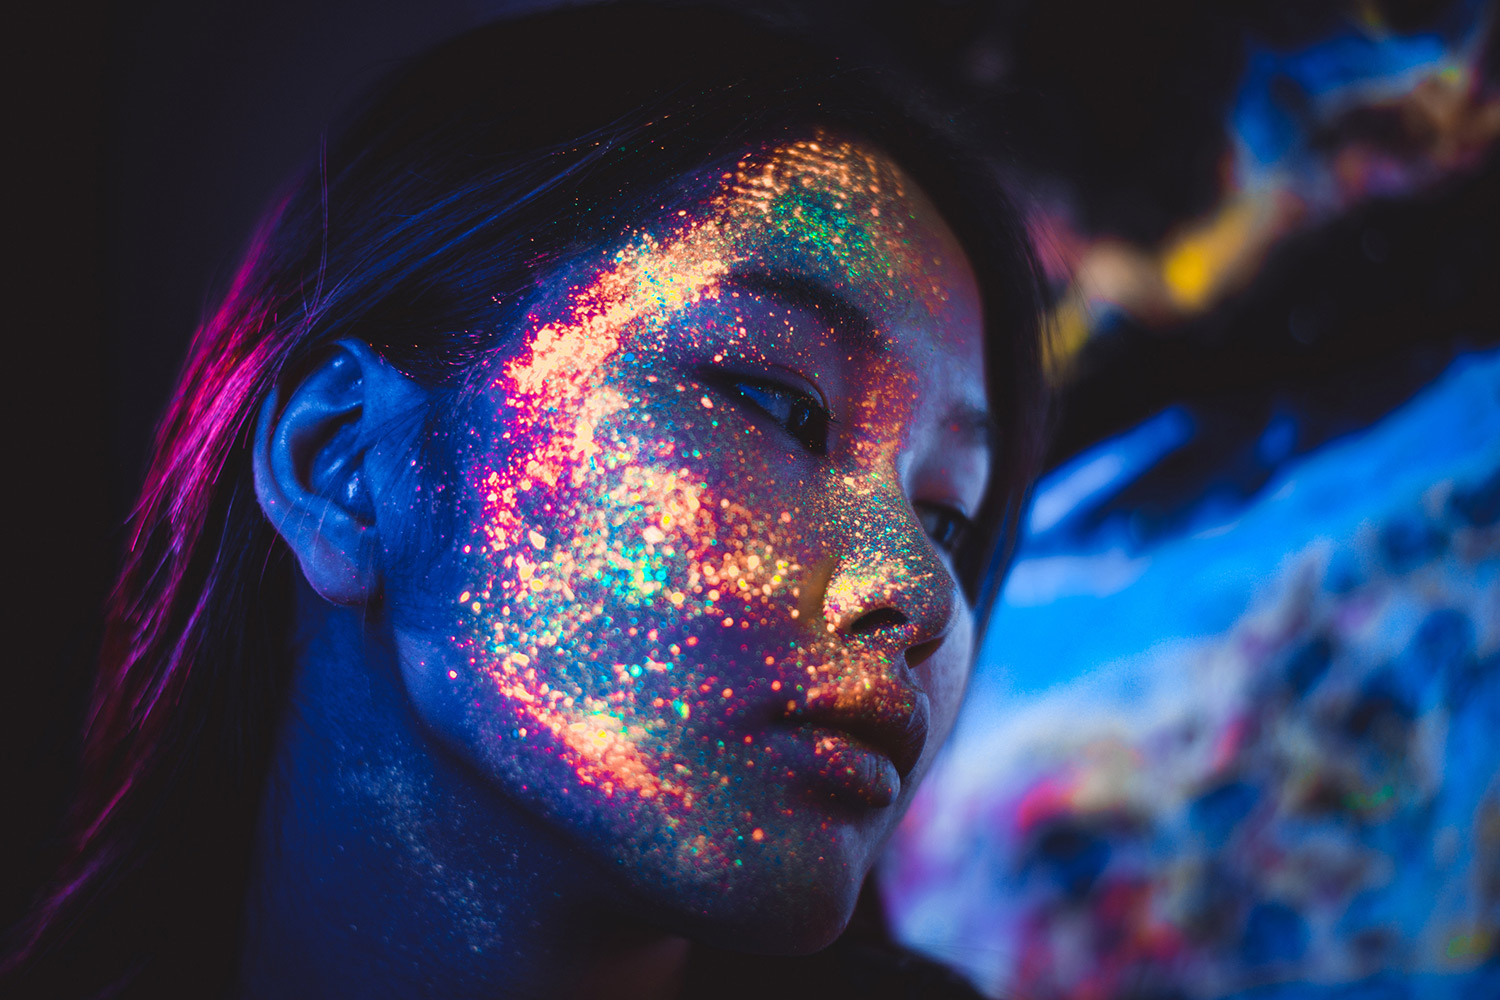 Woman with coloured face paint